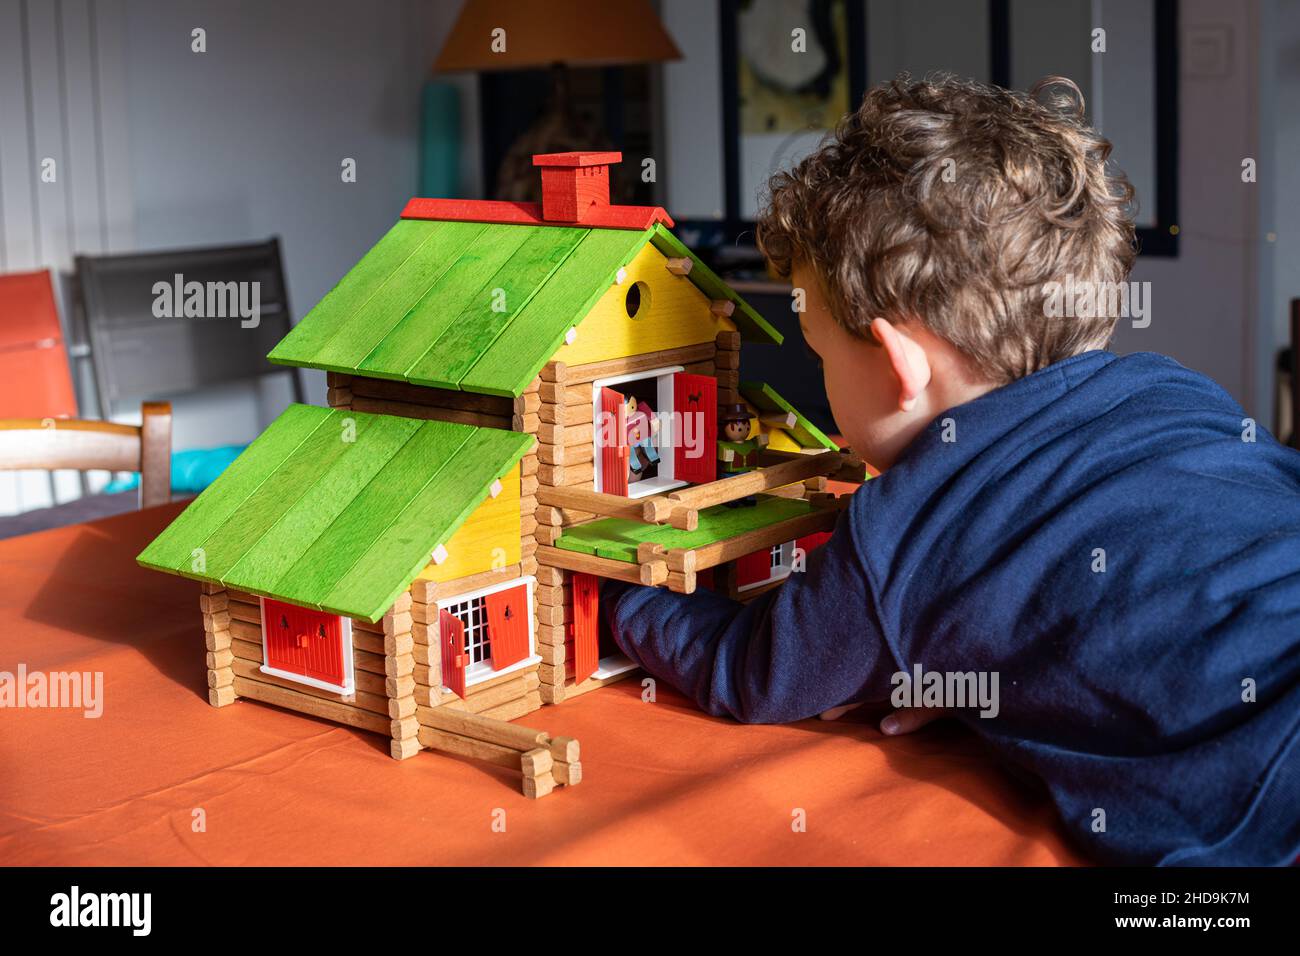 Caucasian child boy playing with a vintage wooden log cabin on a table, a creative wood construction toy. Stock Photo